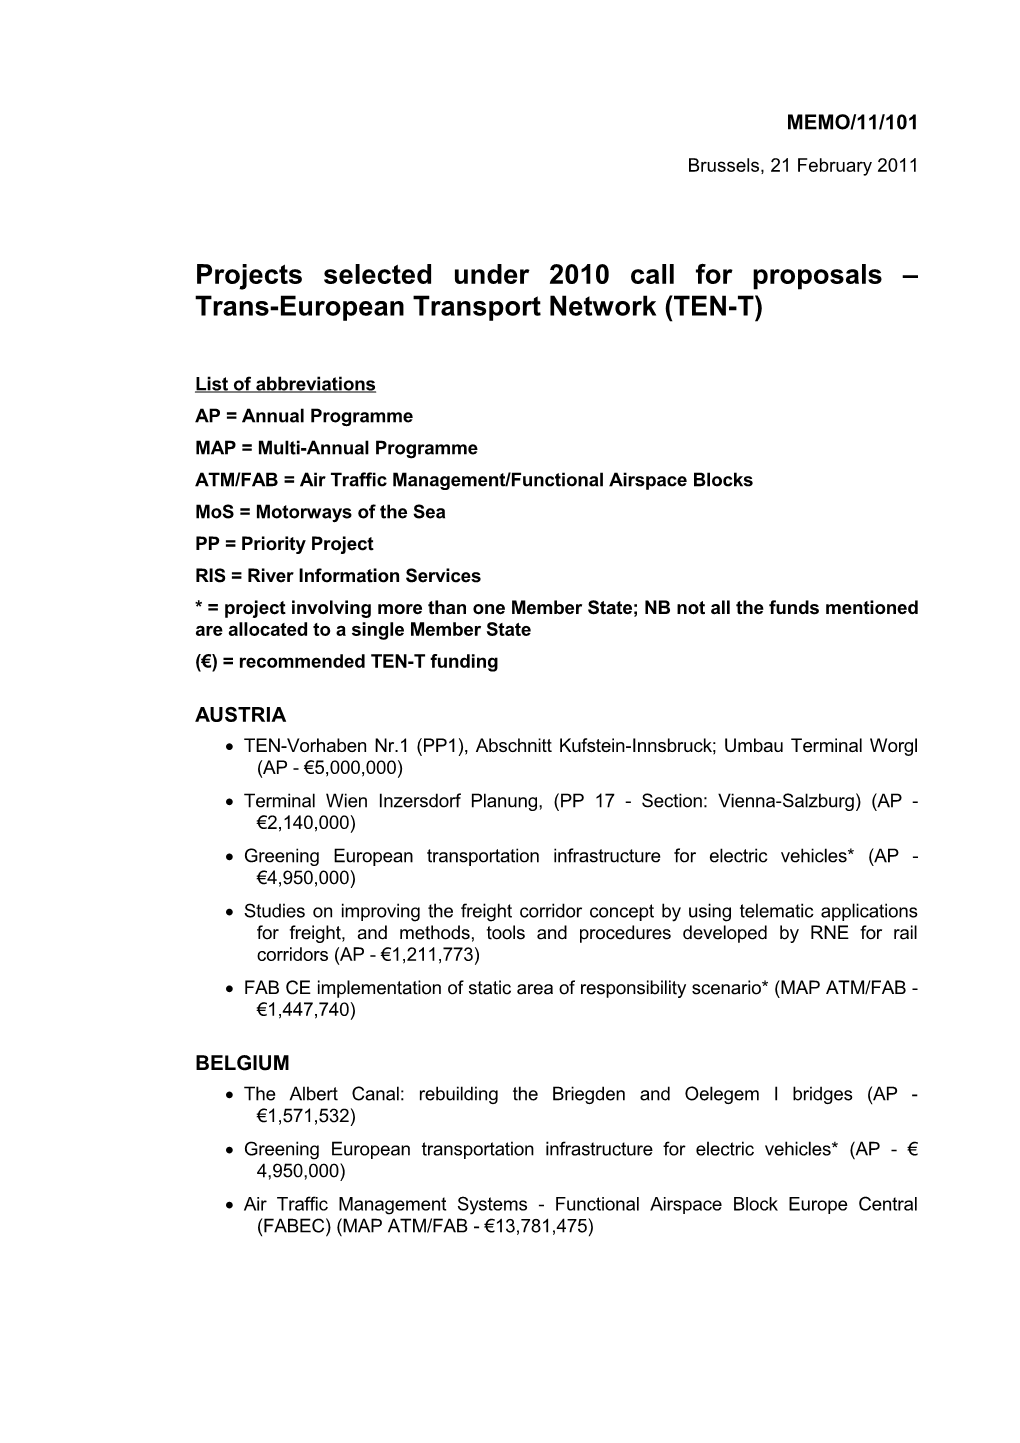 Projects Selected Under 2010 Call for Proposals Trans-European Transport Network (TEN-T)